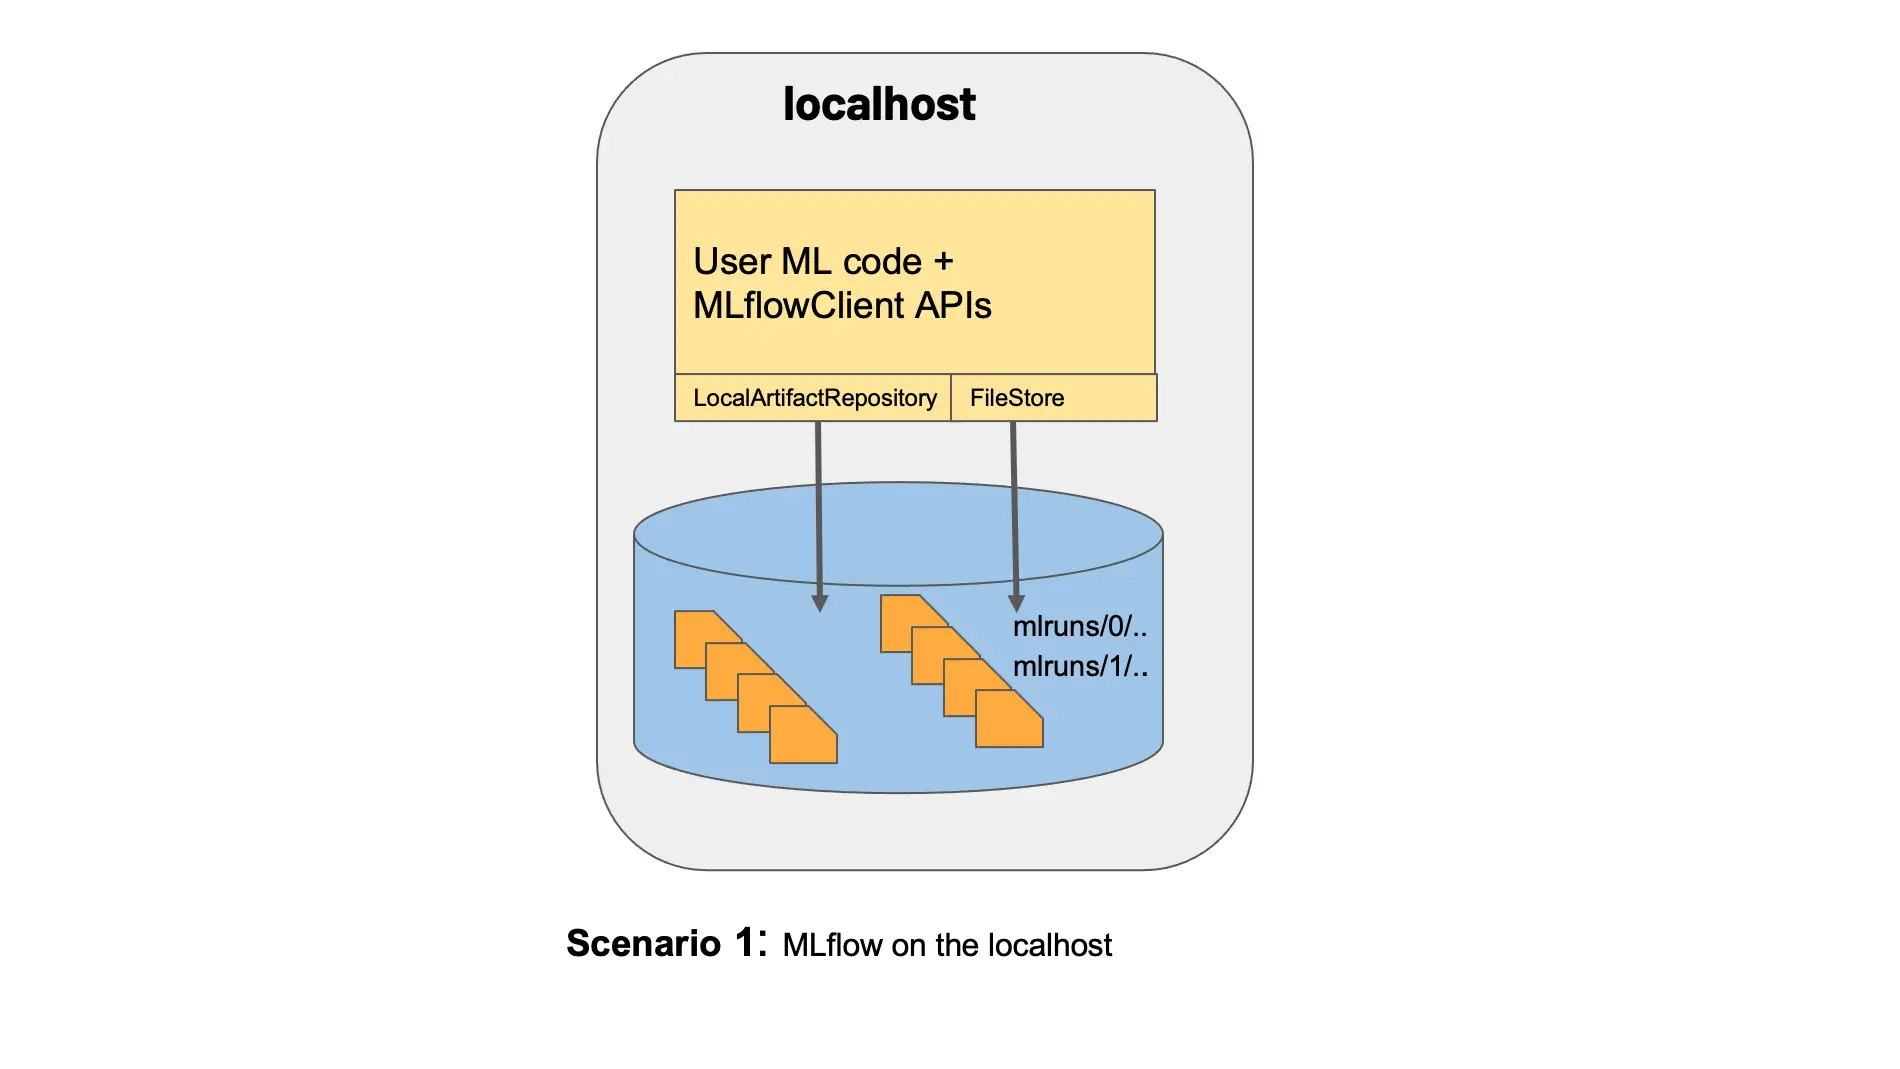 MLflow is deployed locally with file storage for both artifacts and database